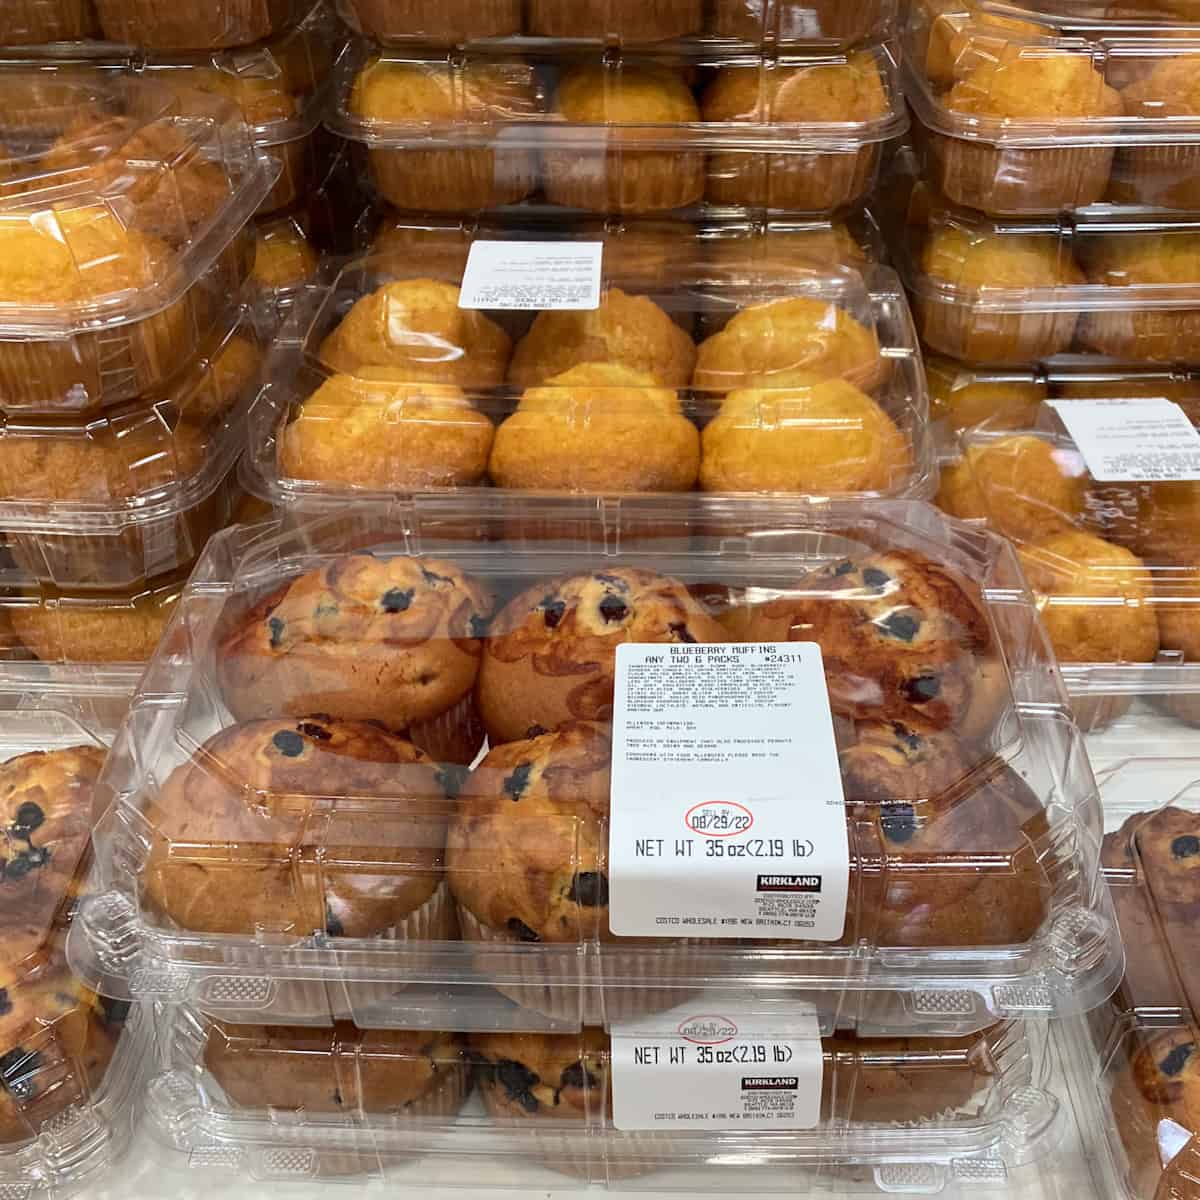 How Long Do Costco Muffins Last?